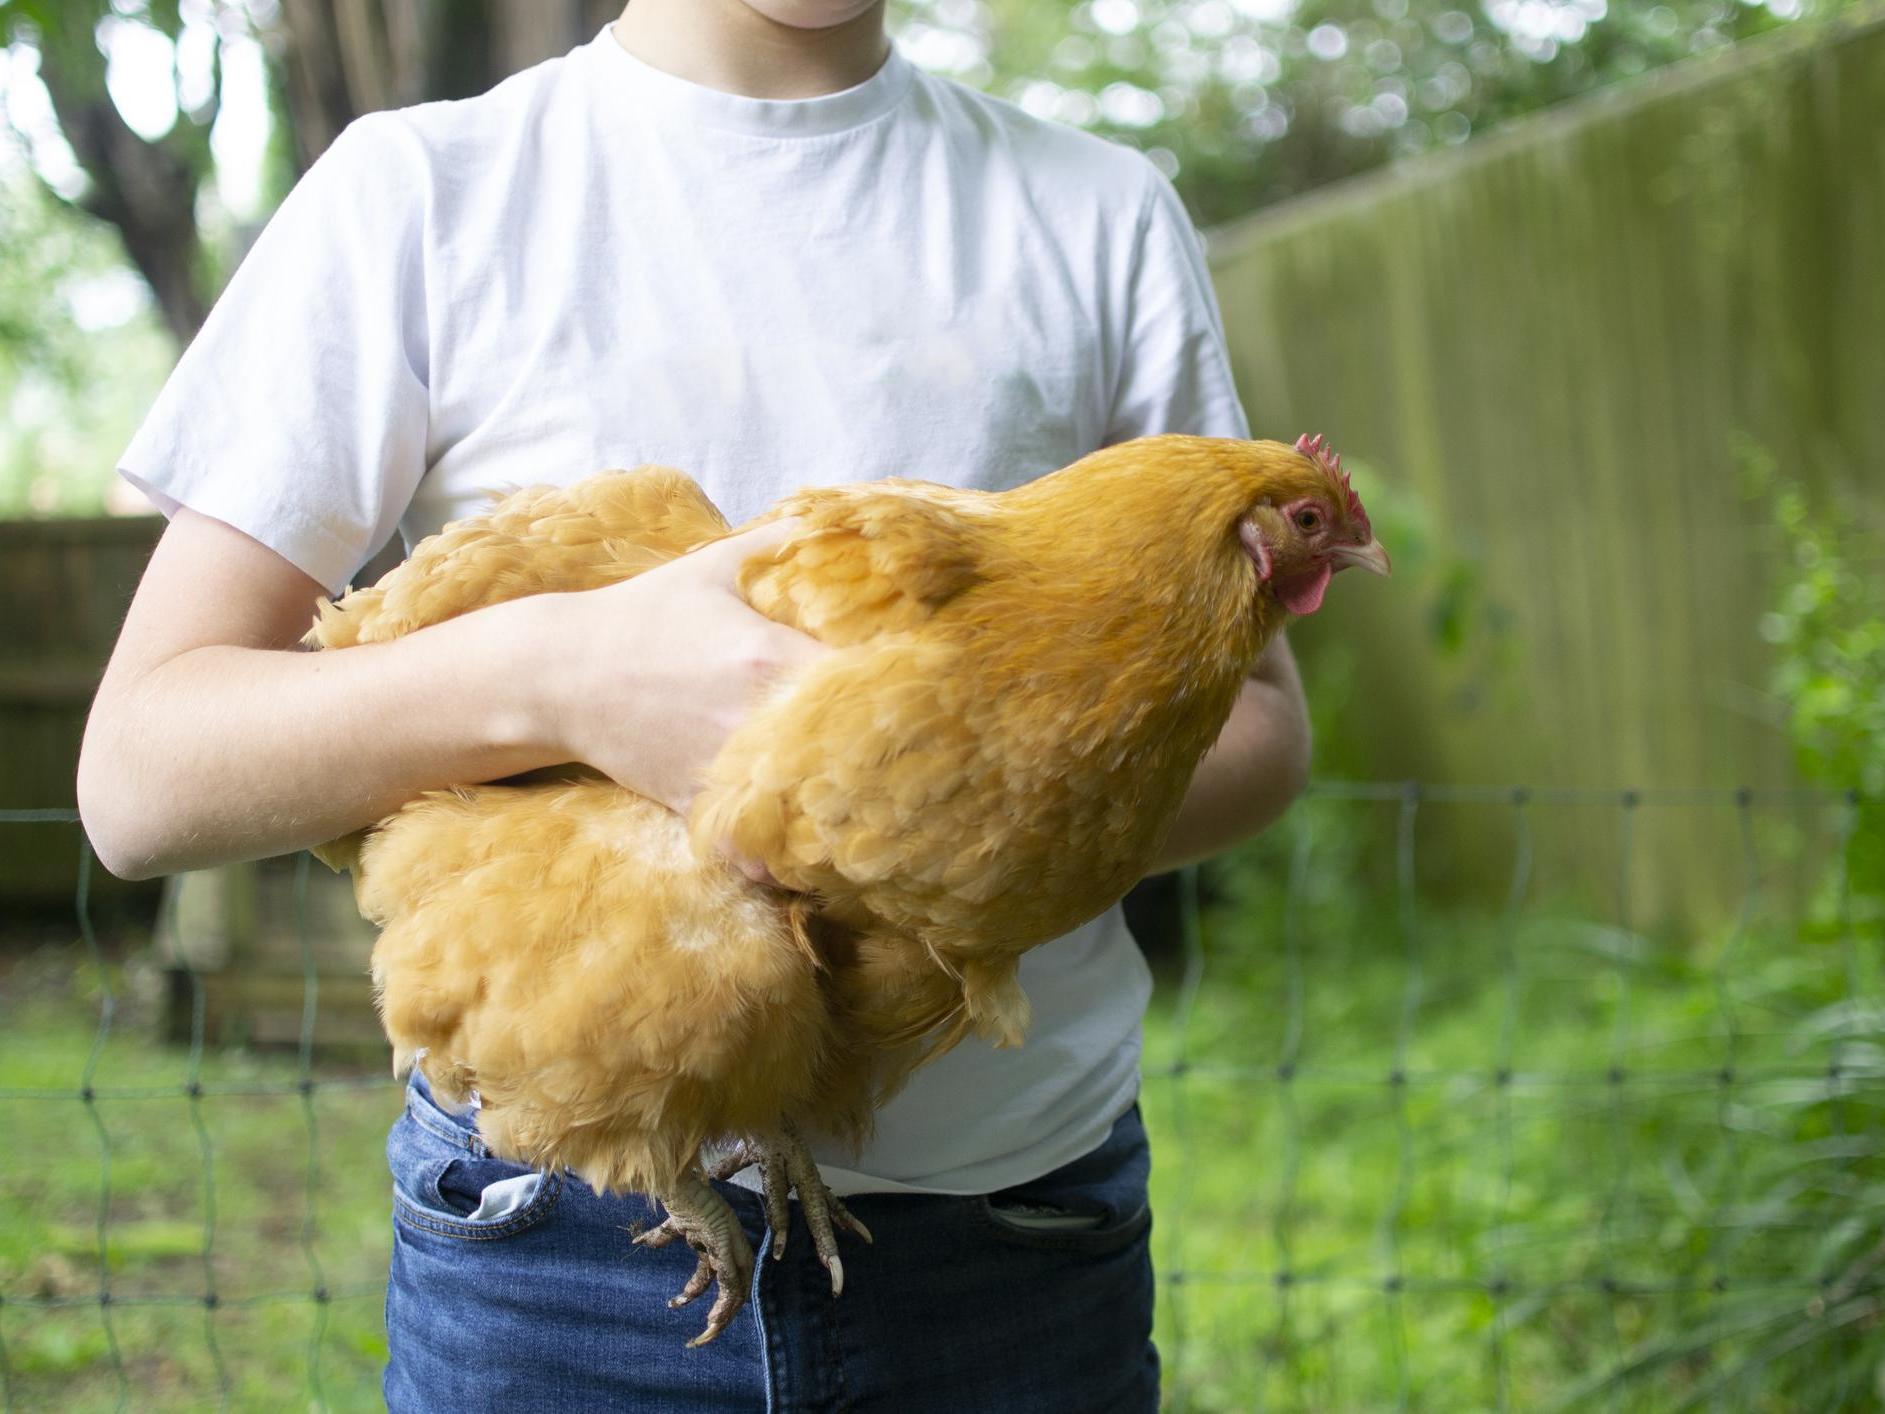 Fresh Start for Hens works at finding homes for ex-commercial chickens which would normally face being sent to slaughter